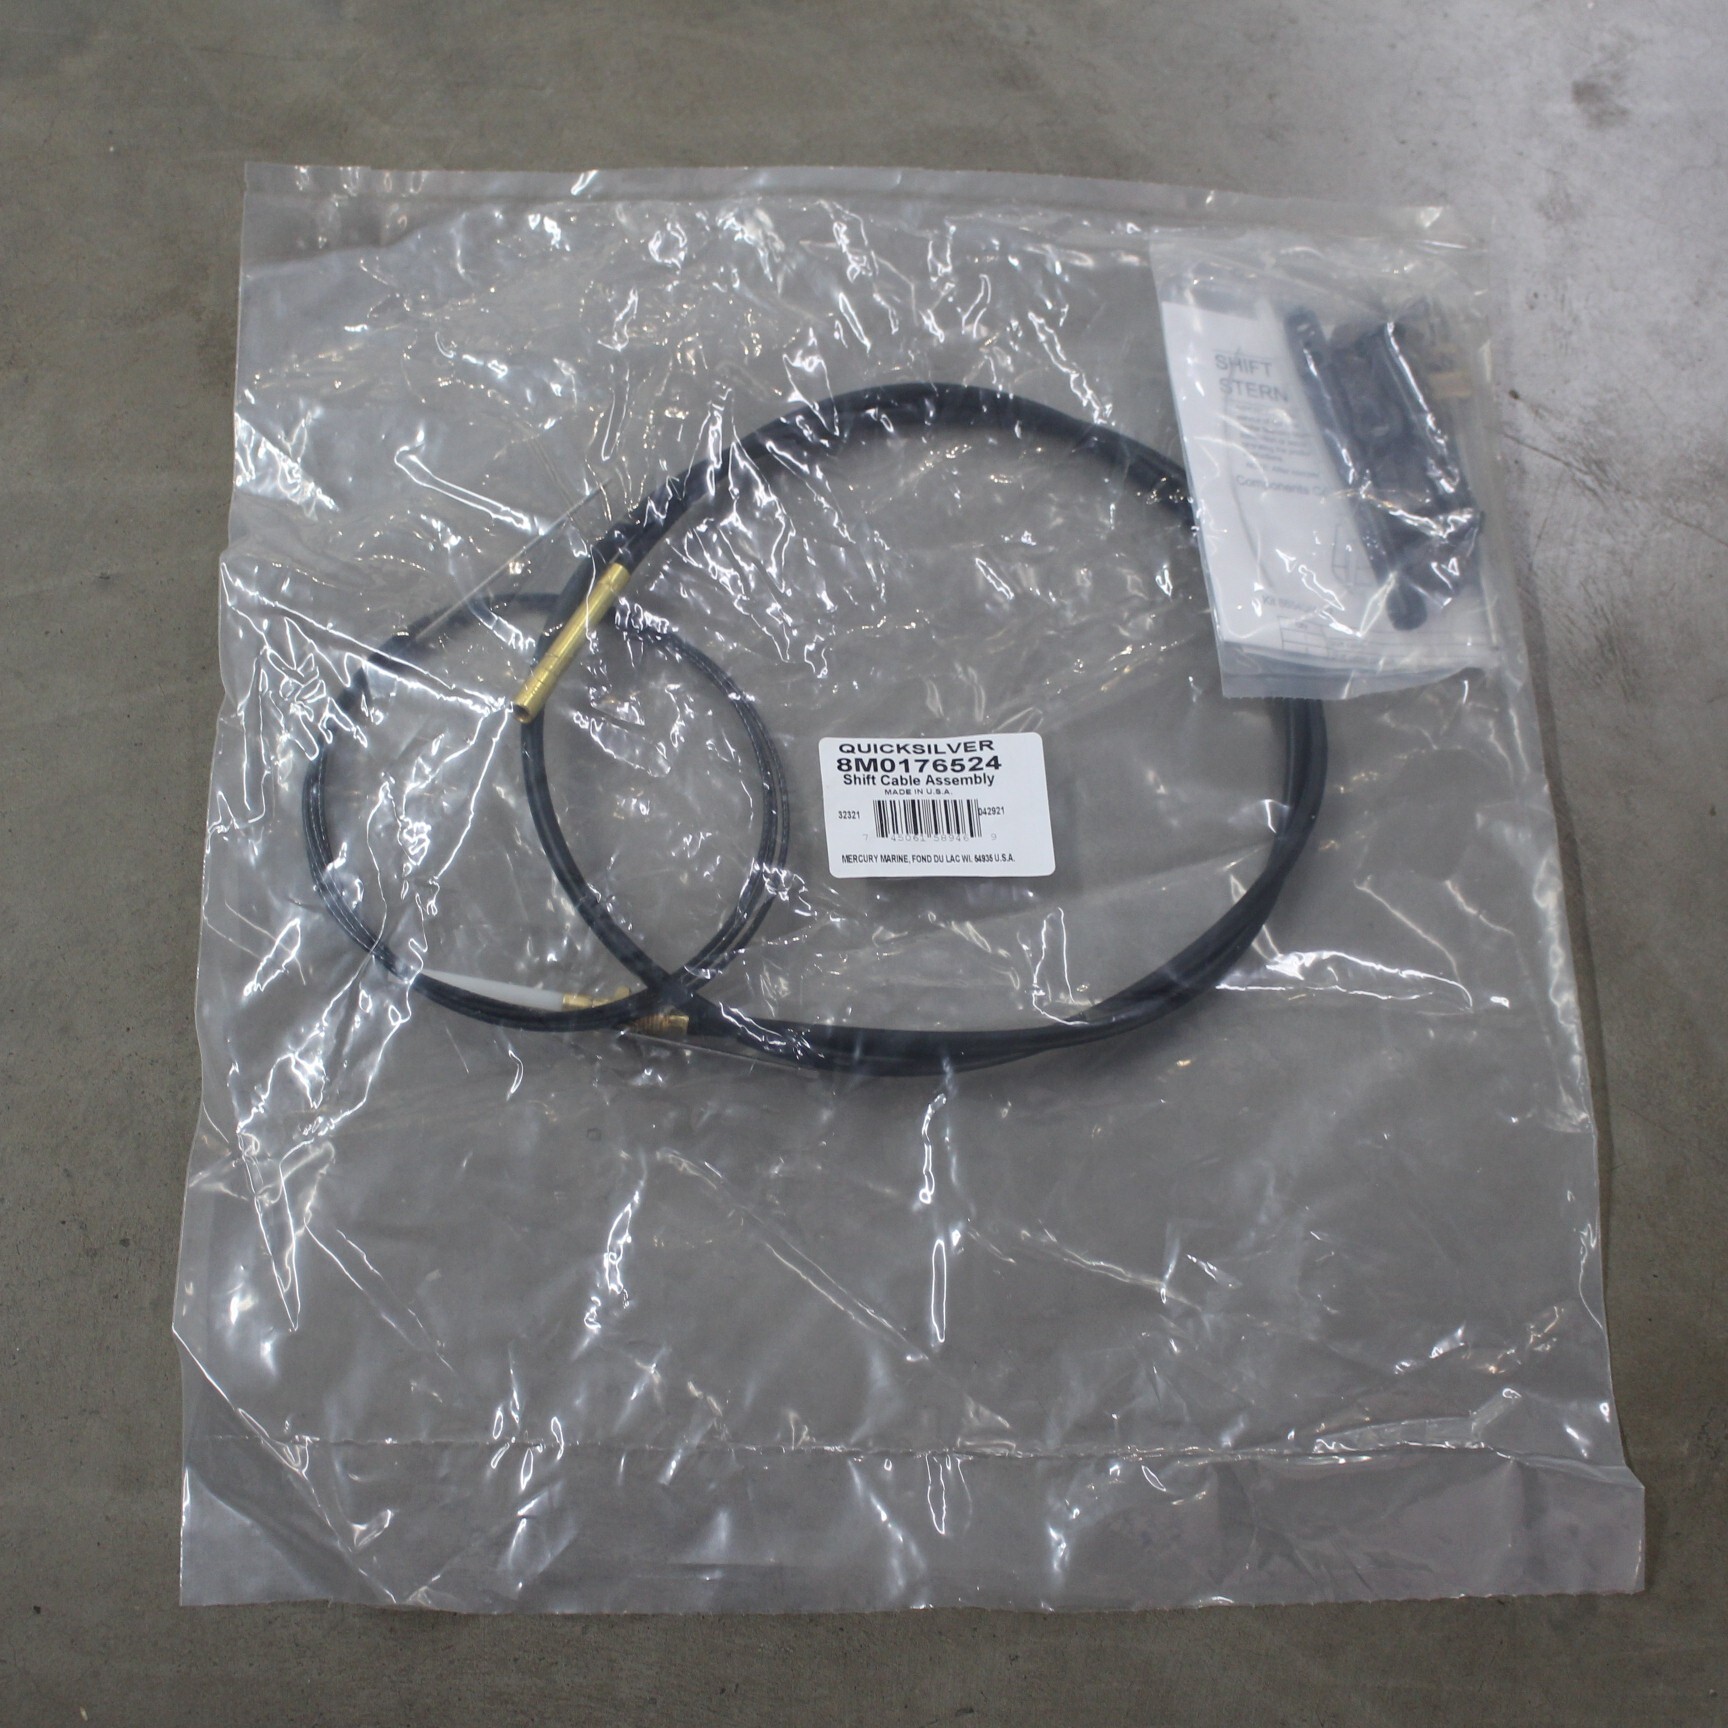 Quicksilver Shift Cable Assembly